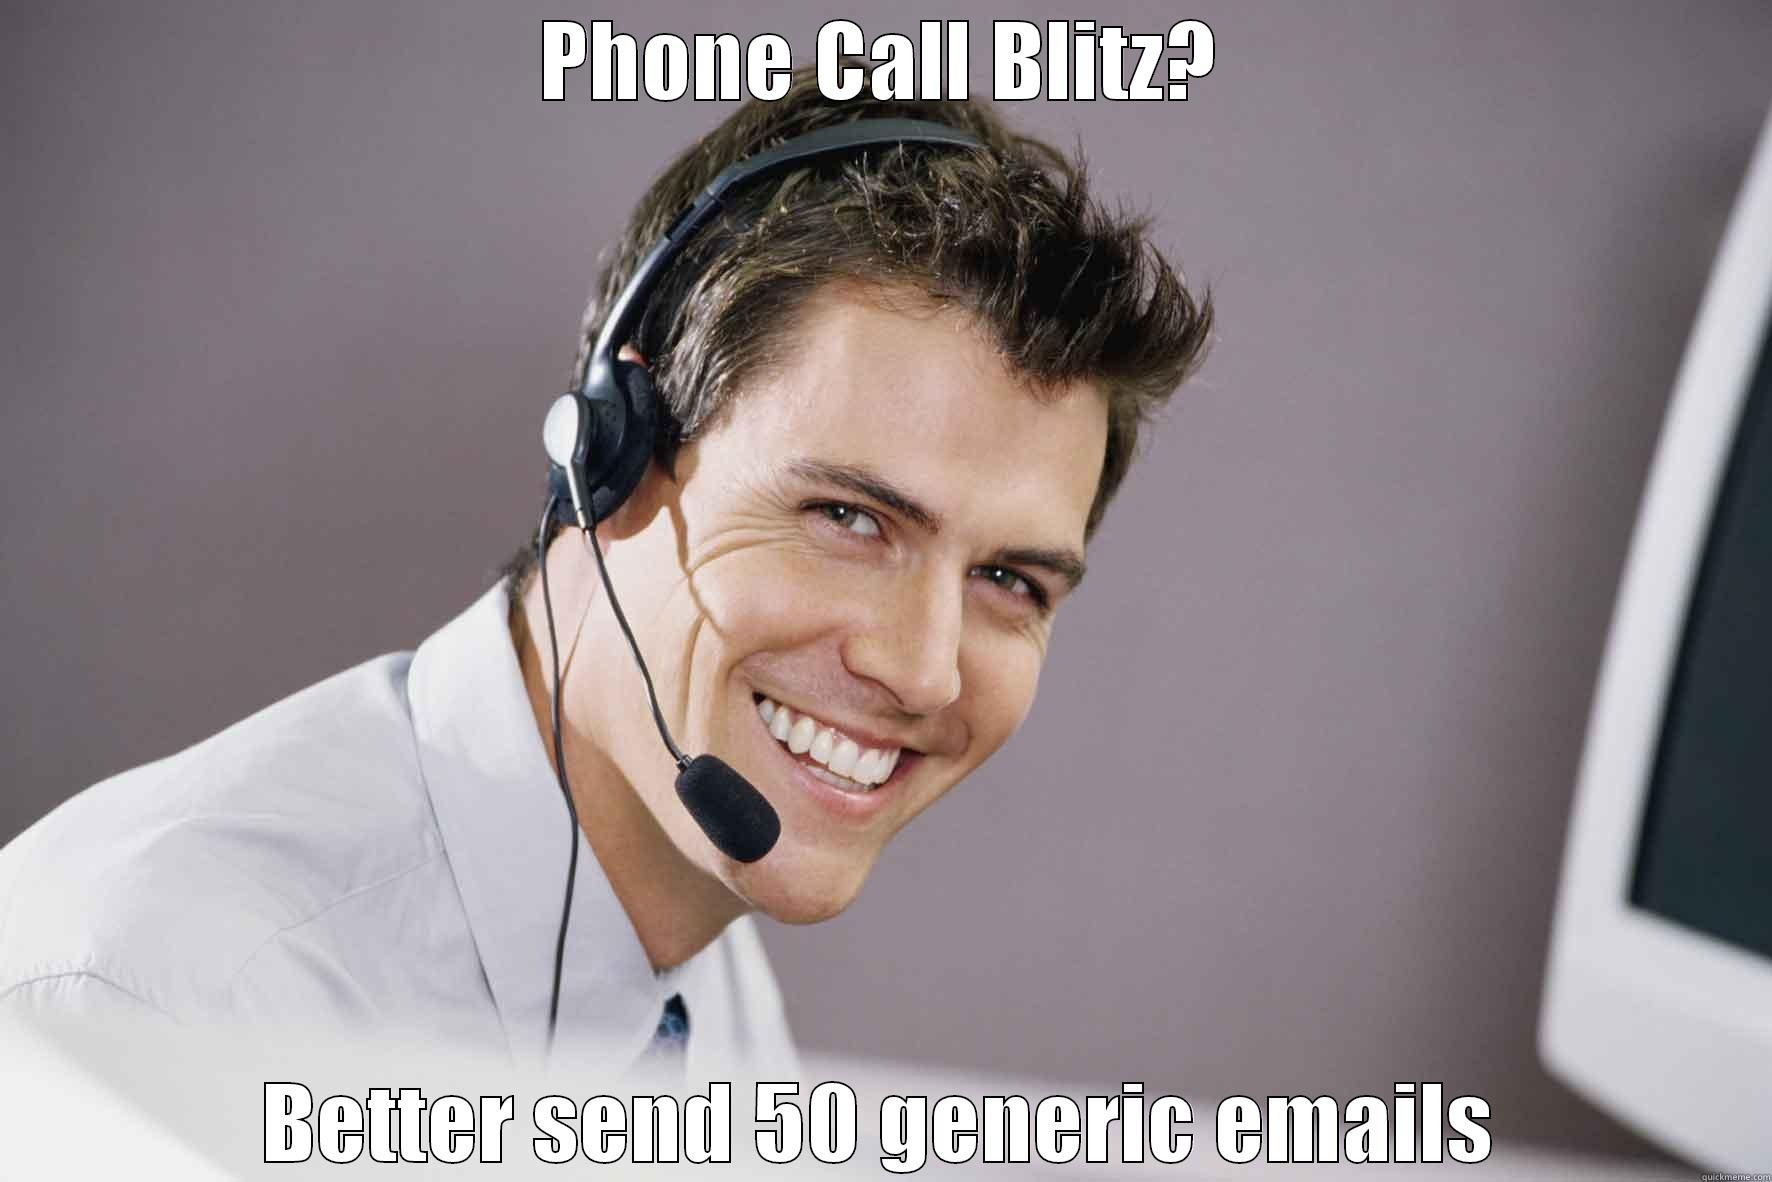 Phone Sales Guy - PHONE CALL BLITZ? BETTER SEND 50 GENERIC EMAILS Misc